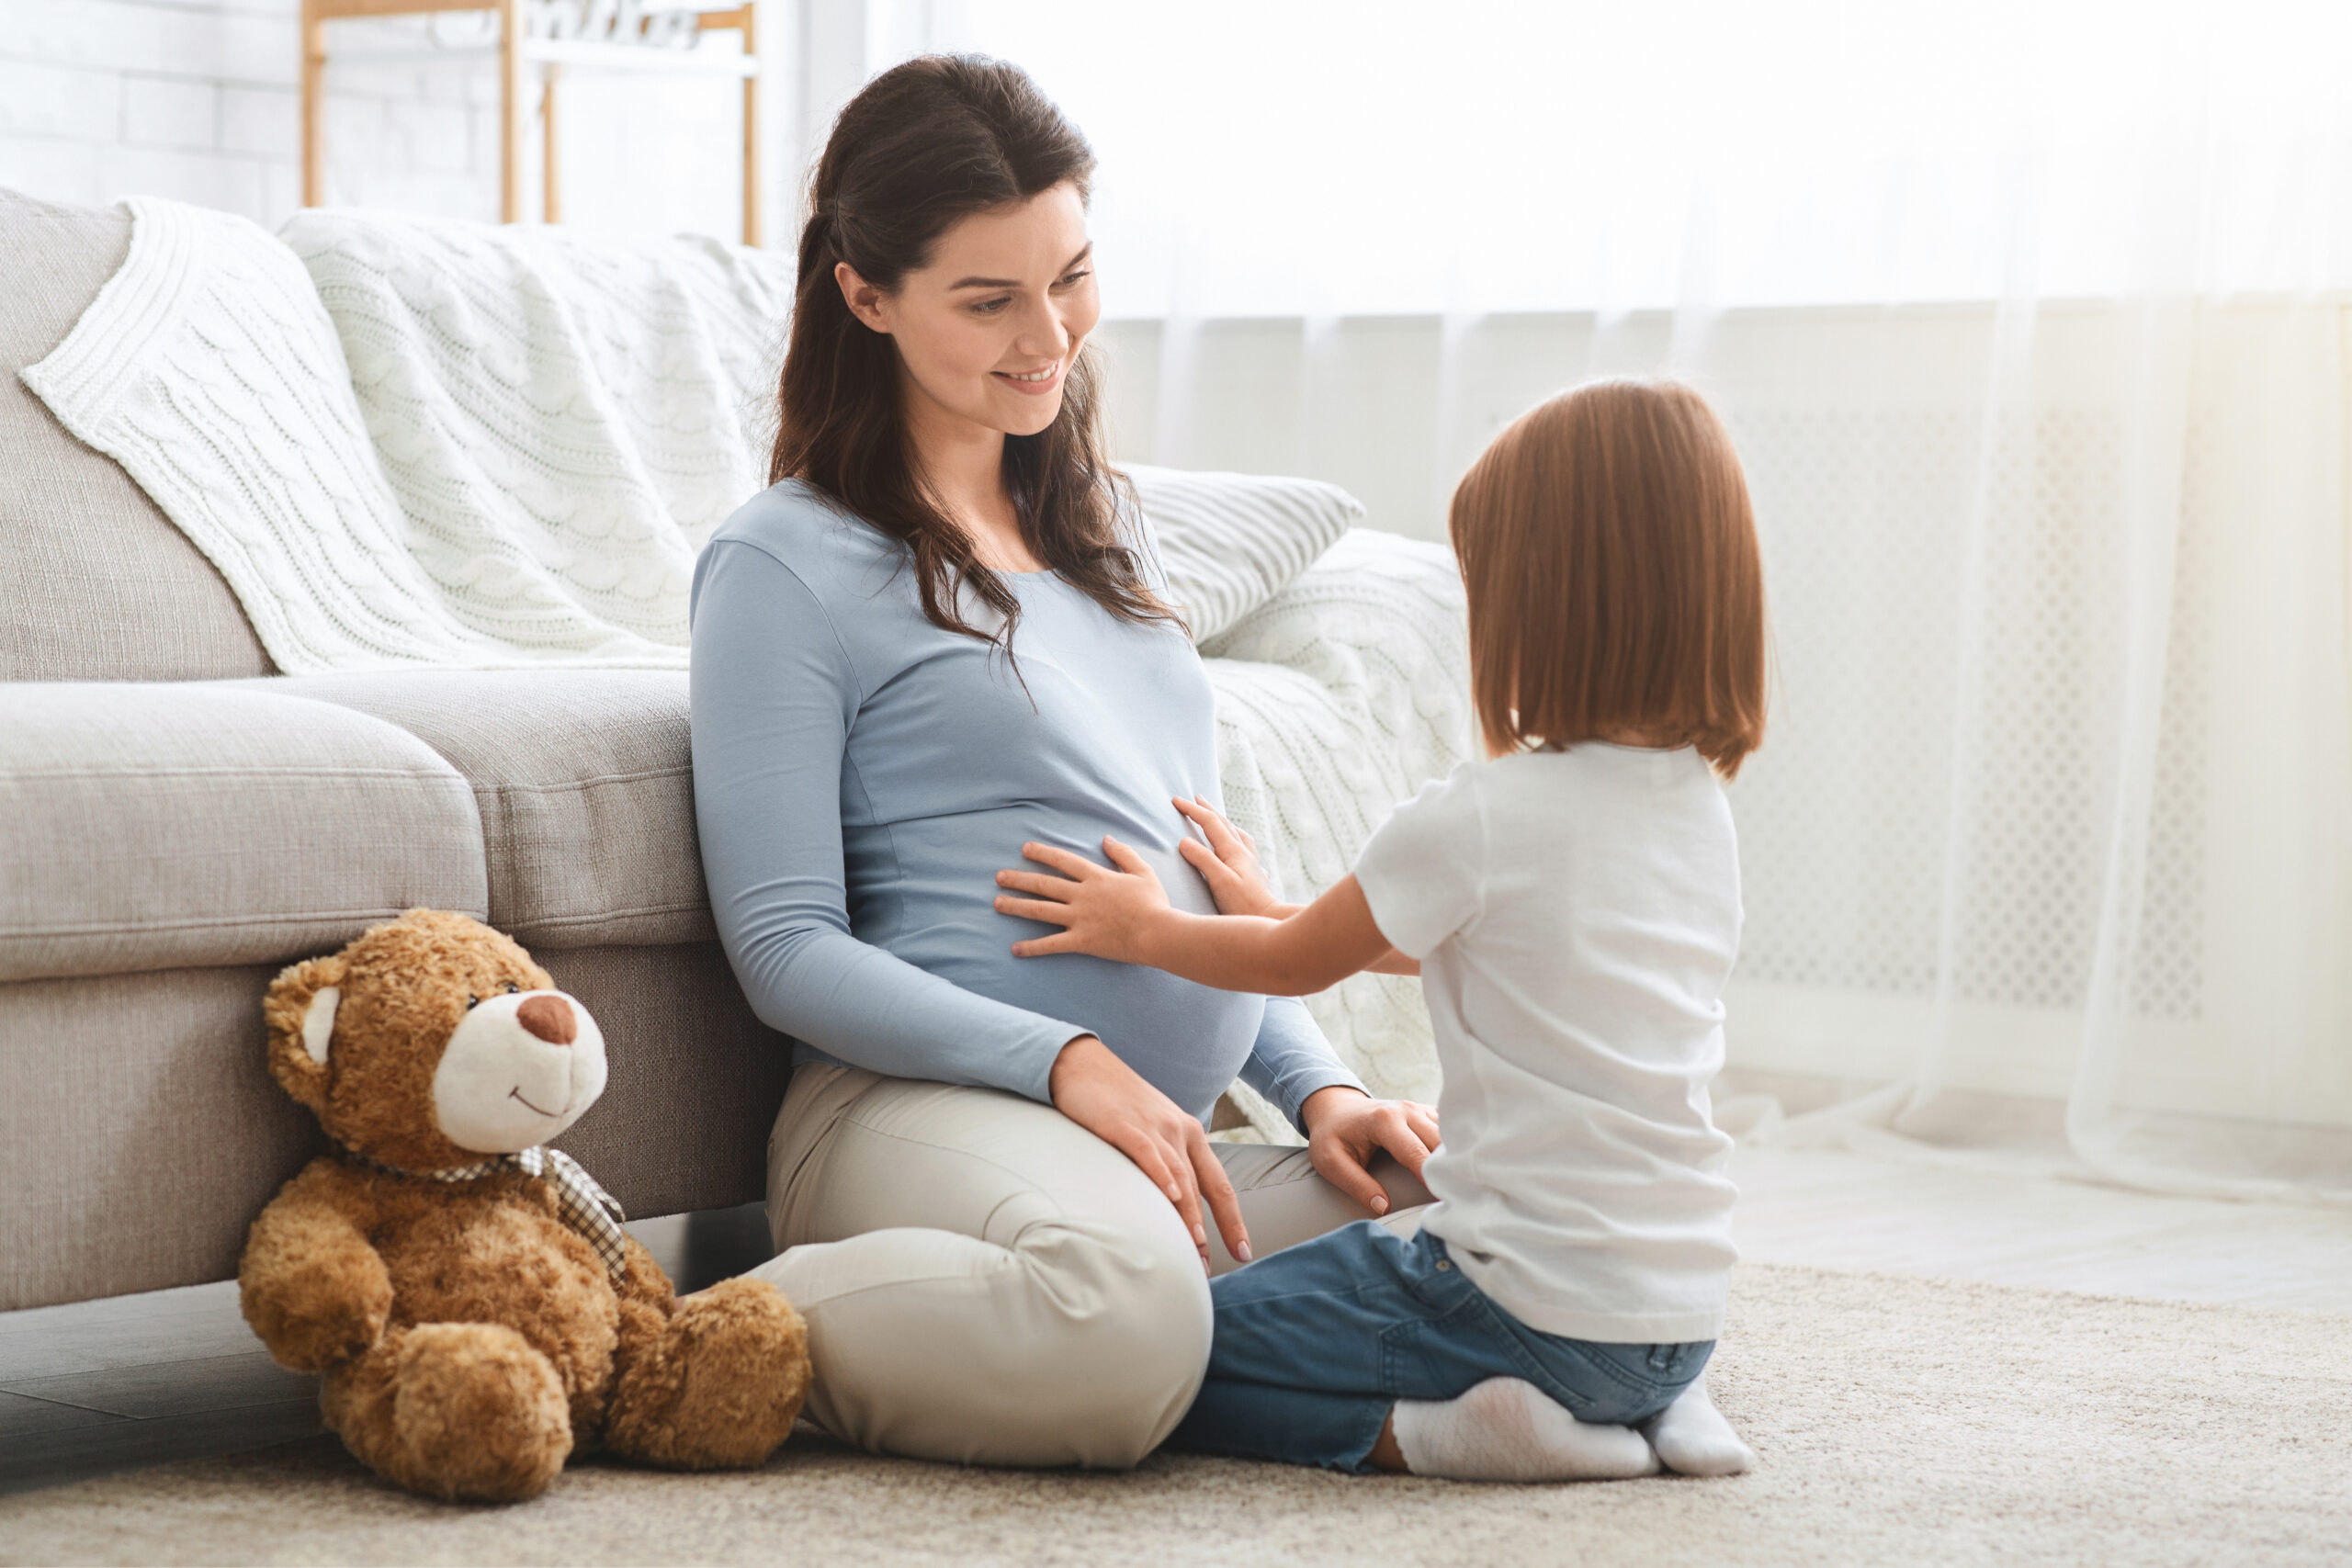 A surrogate mom in a cozy home setting, smiling as her daughter tenderly touches her belly.